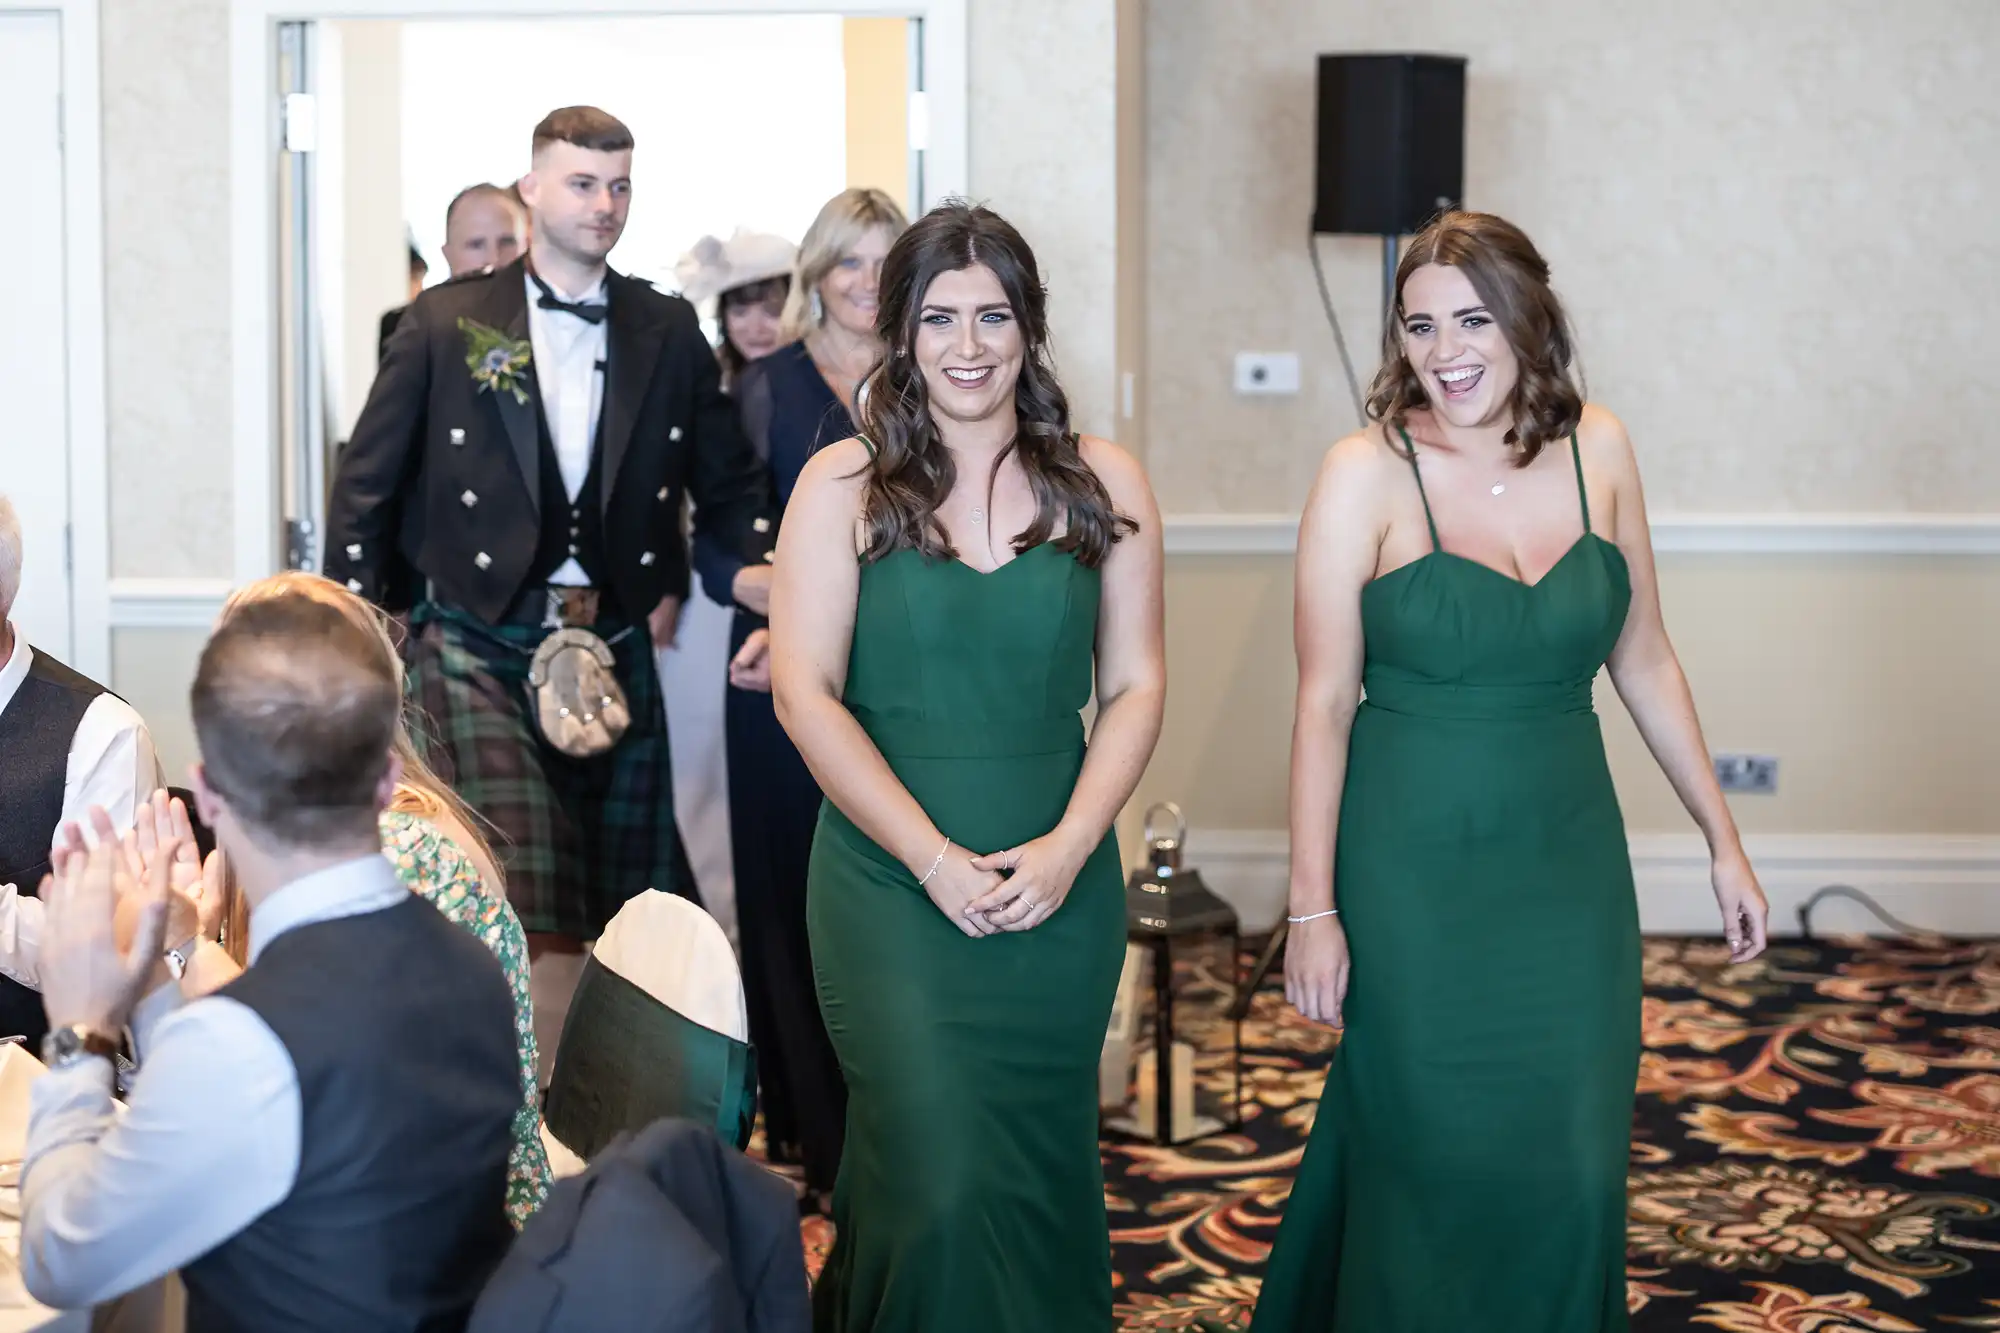 Two women in green dresses smiling and walking through a room of applauding guests at a formal event.